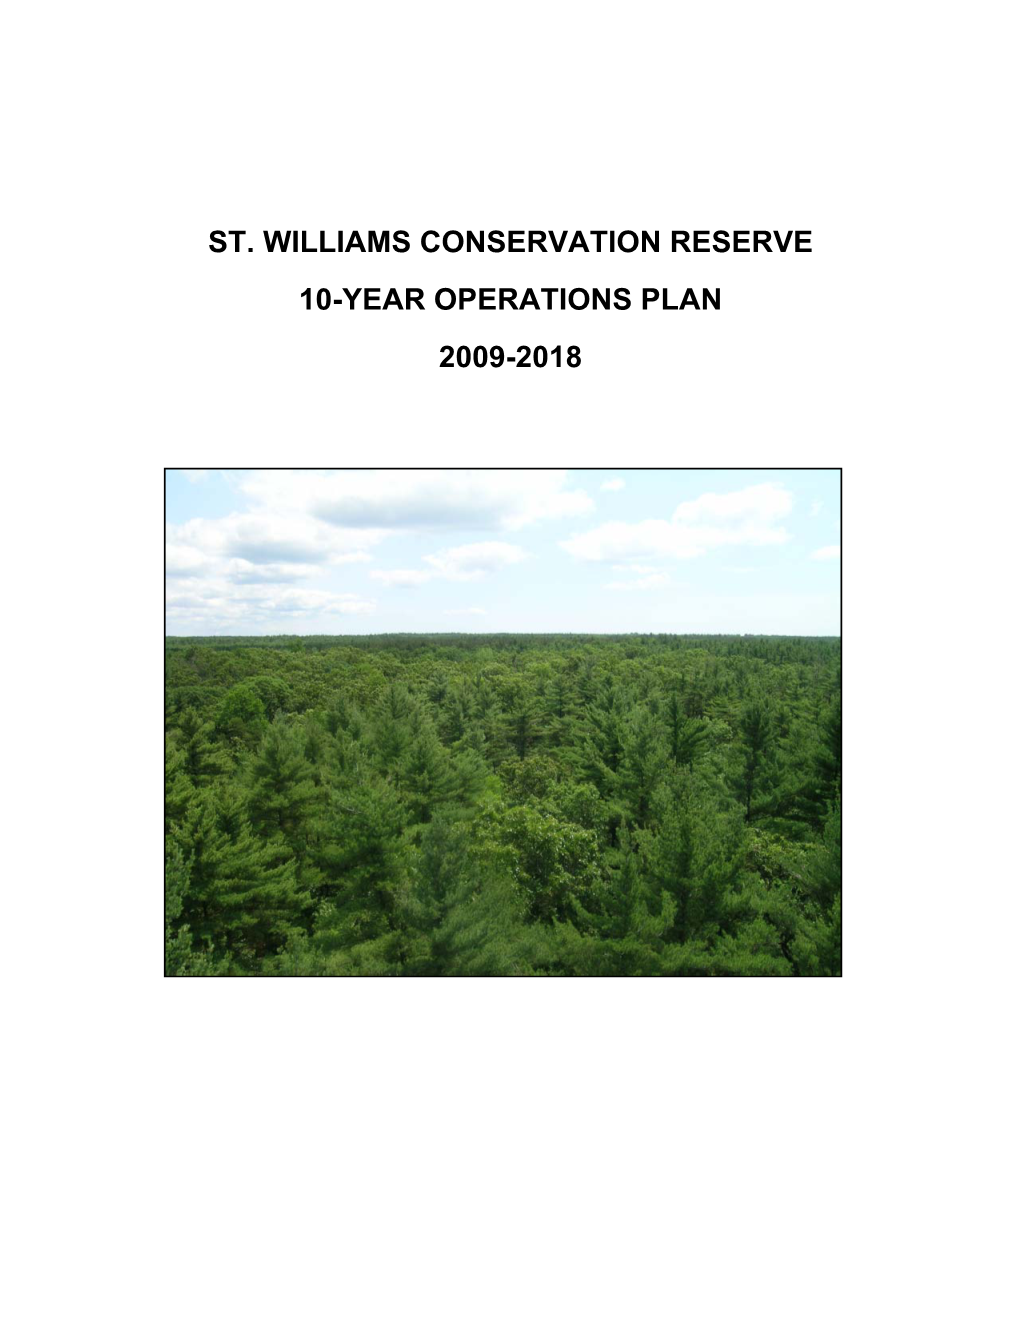 St. Williams Conservation Reserve – 10 Year Operations Plan 2009-2018